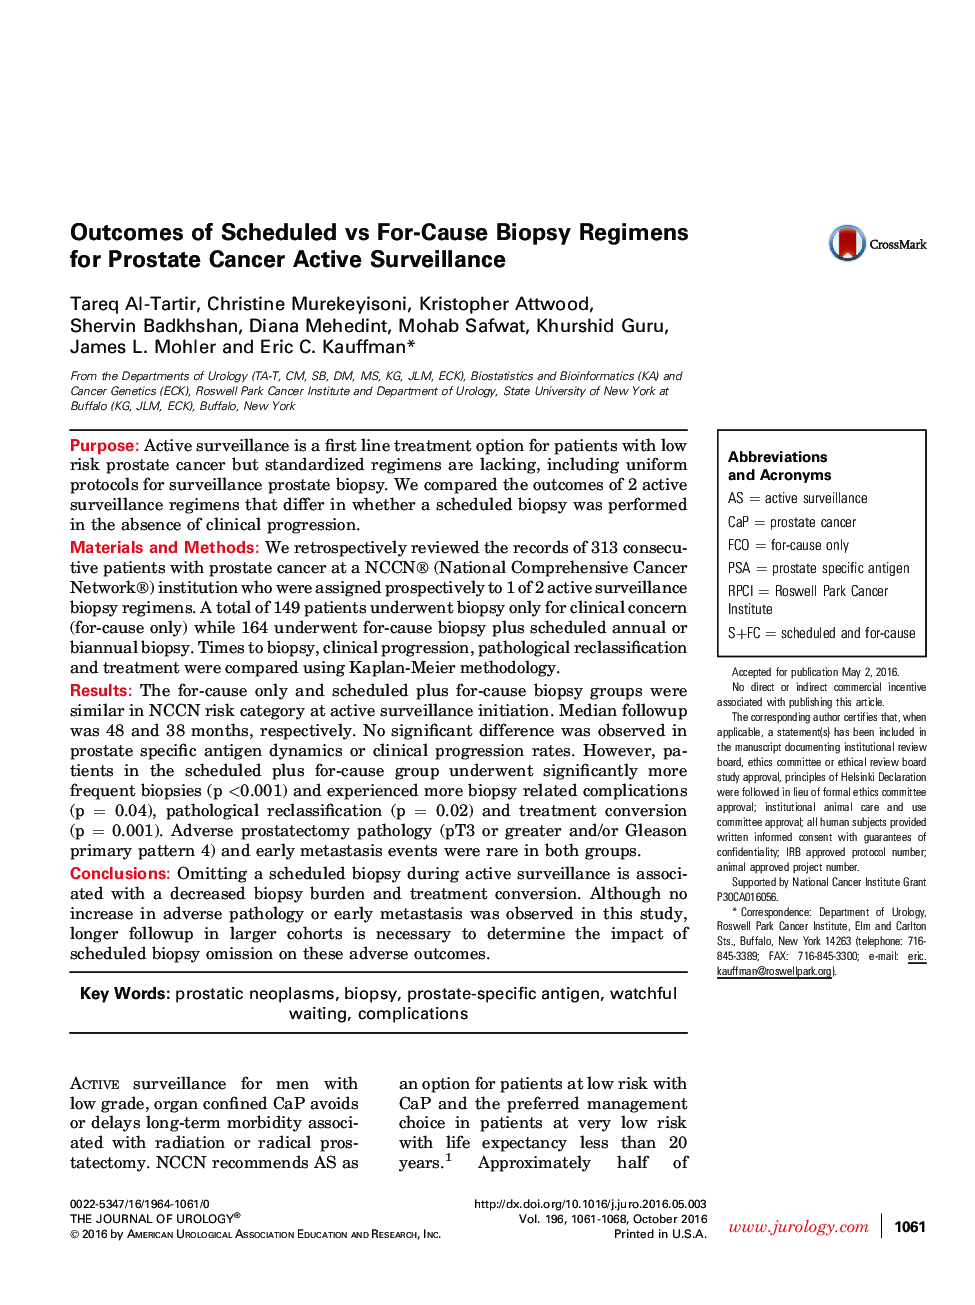 Outcomes of Scheduled vs For-Cause Biopsy Regimens for Prostate Cancer Active Surveillance 